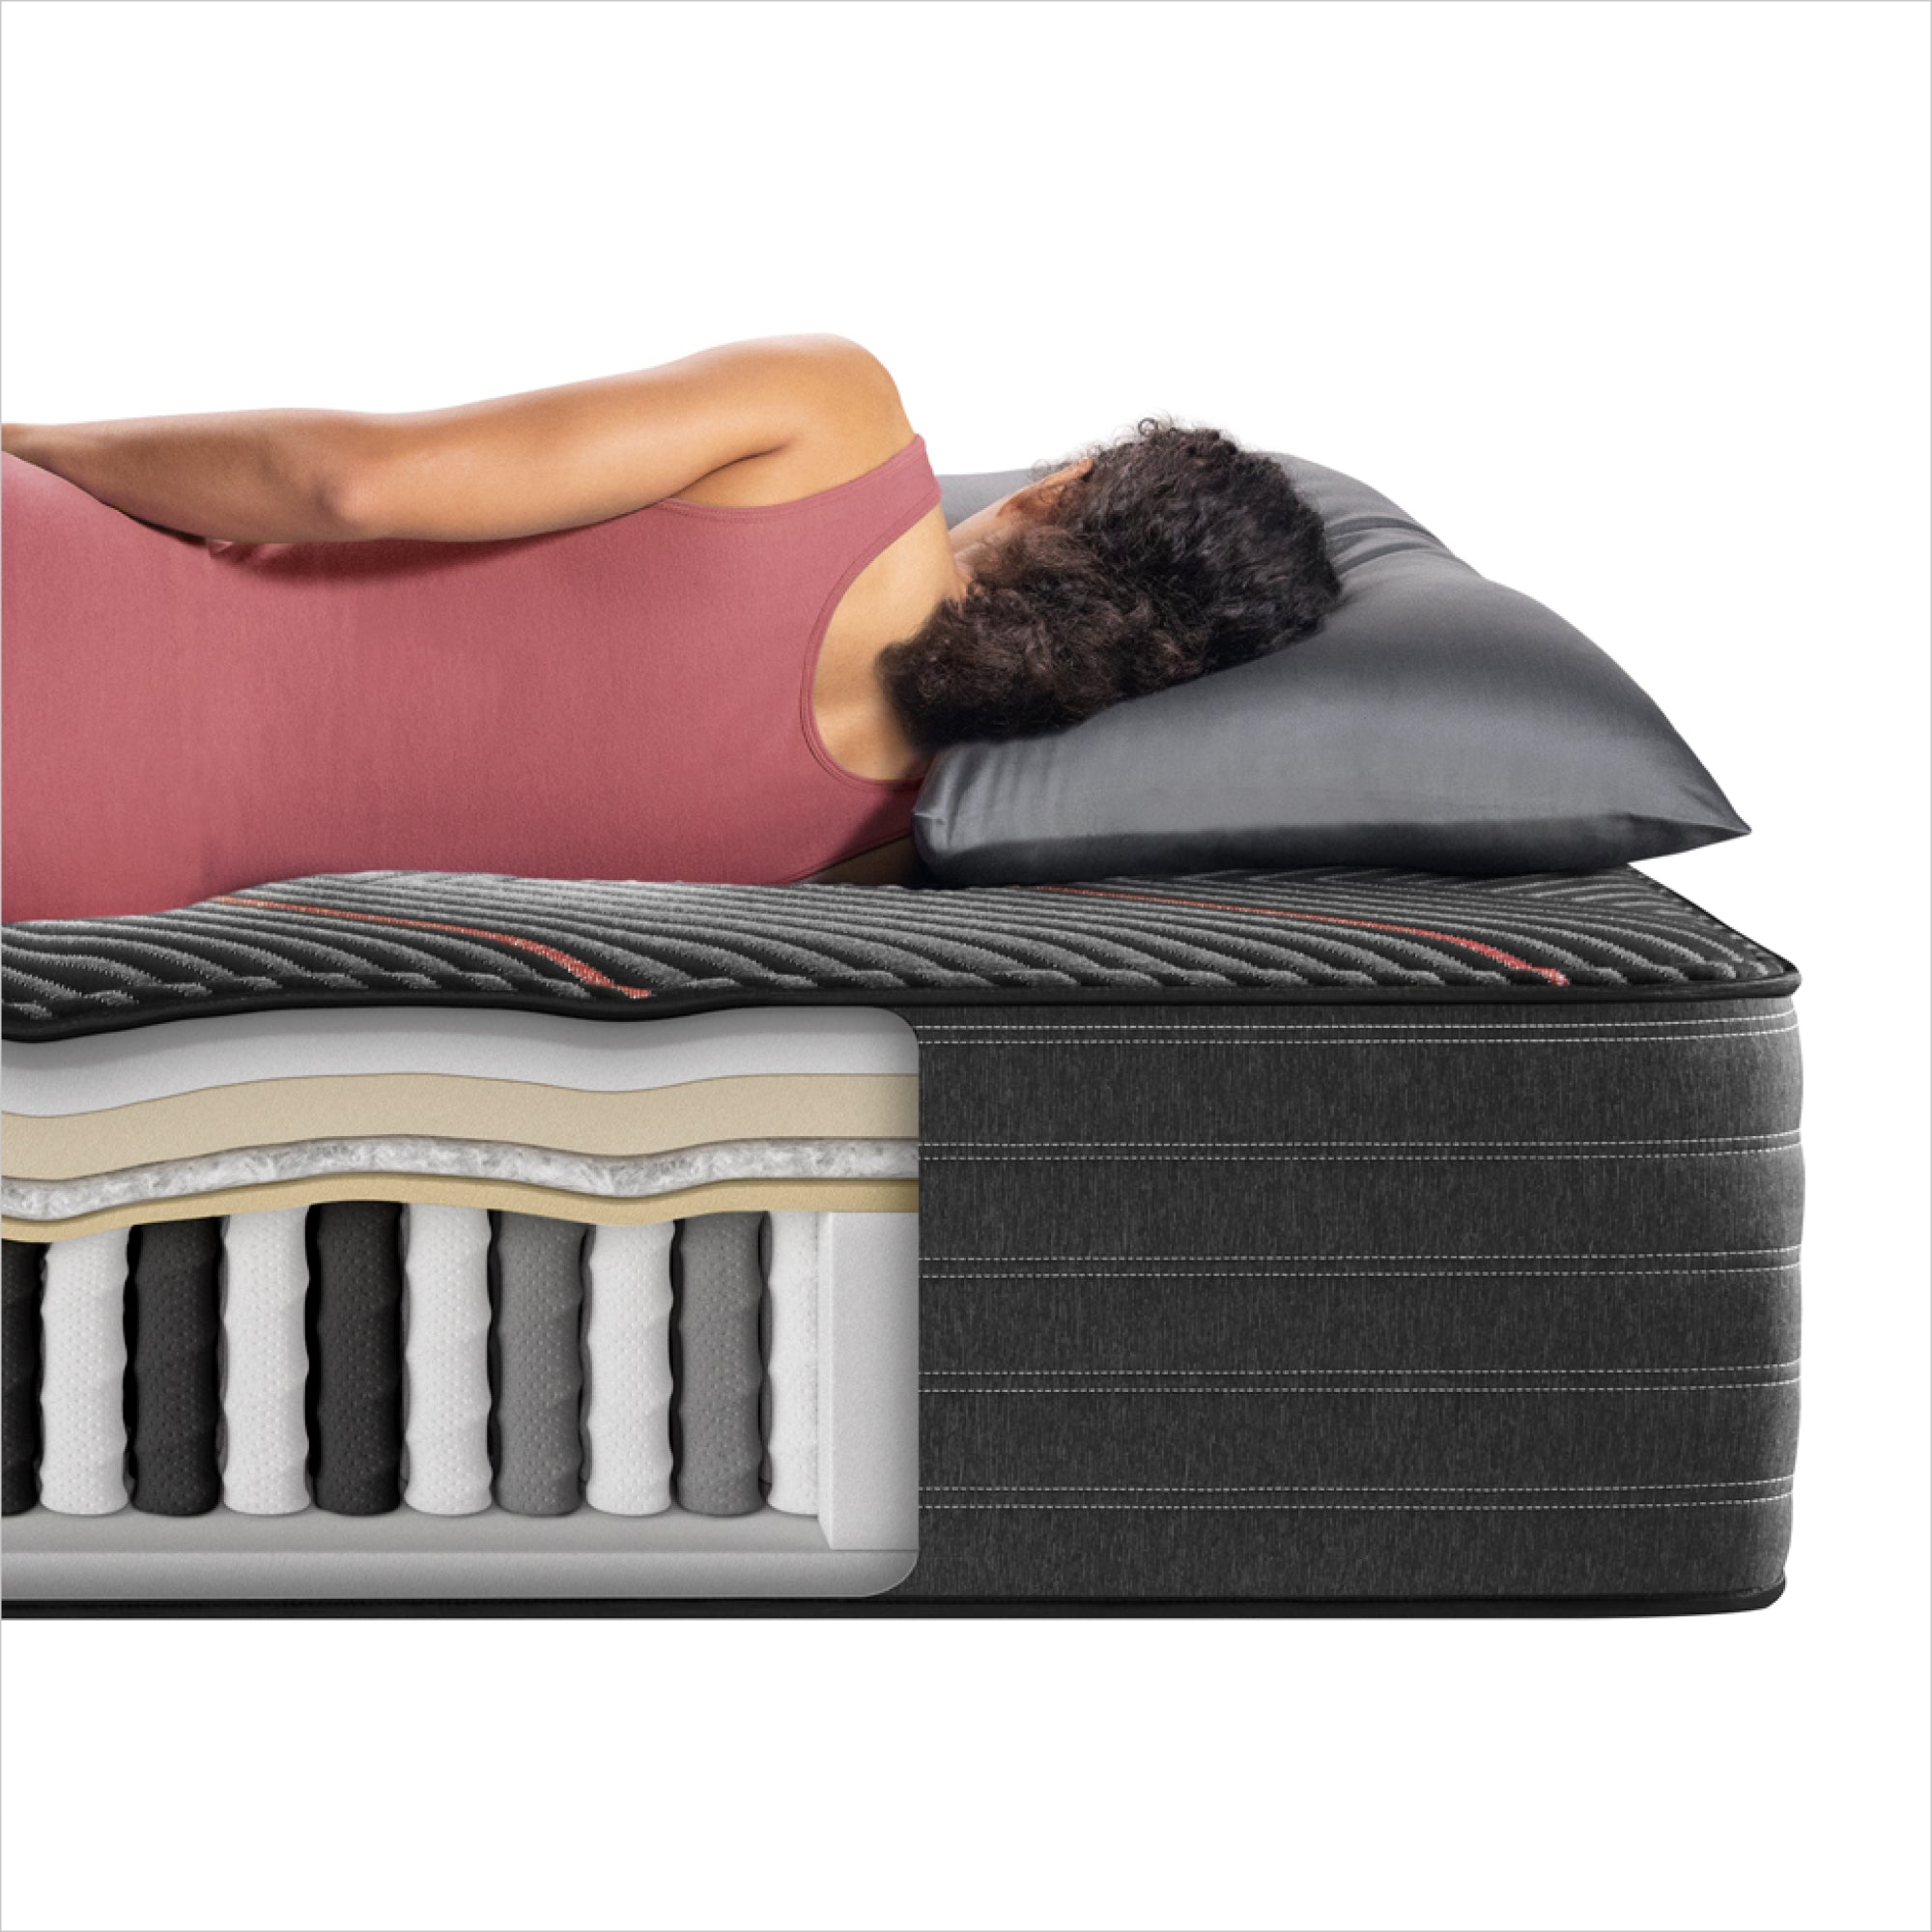 Diagram showing the material inside the Beautyrest Black hybrid mattress||series: deluxe cx-class|| feel: medium